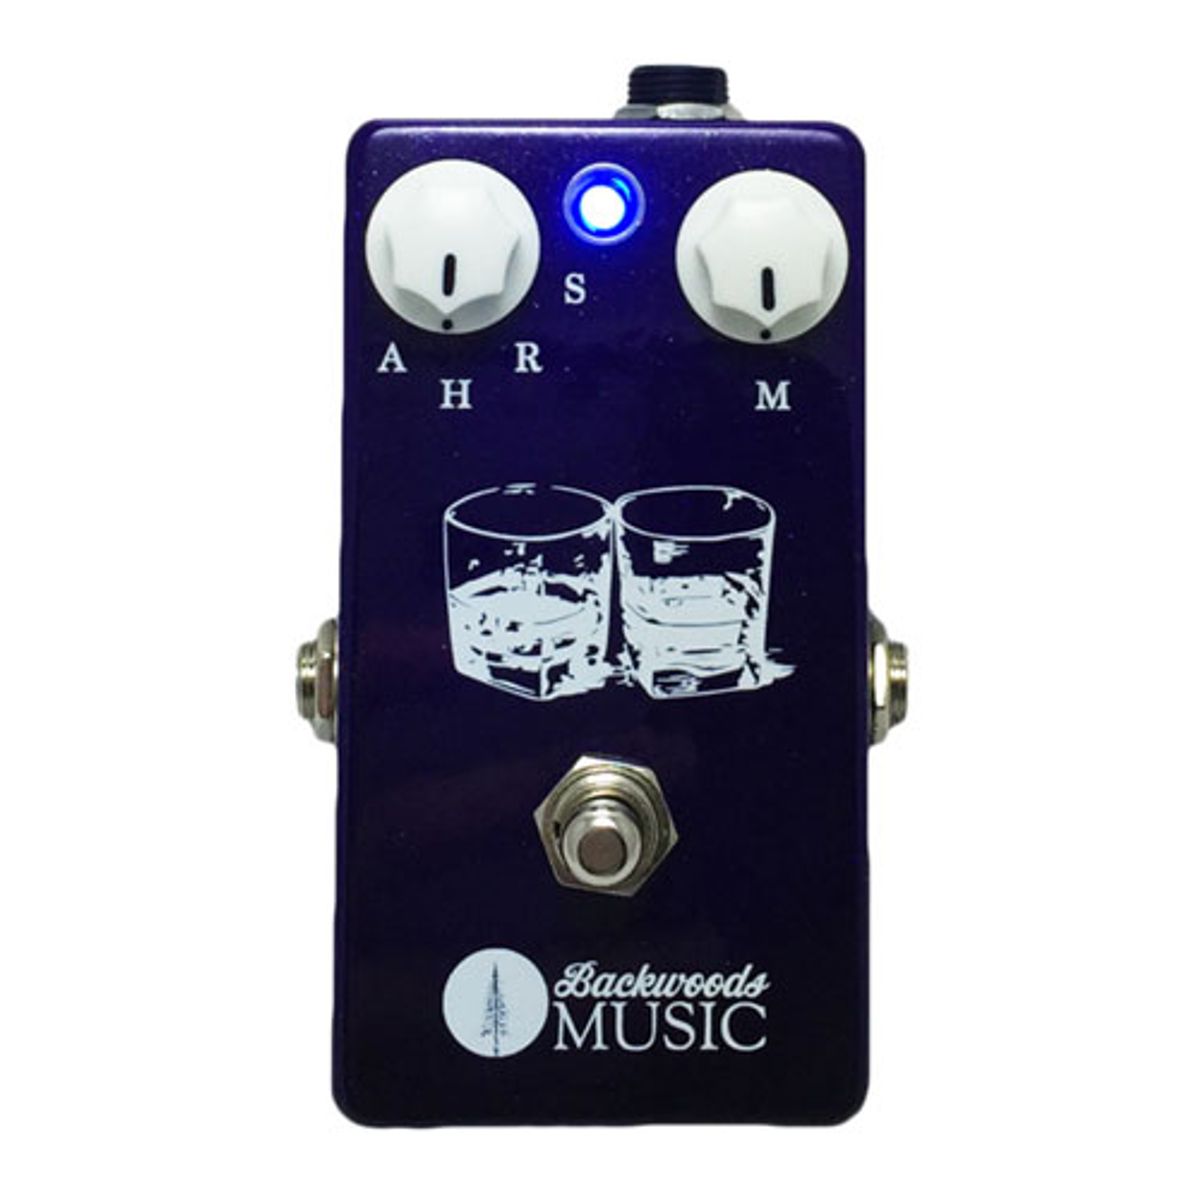 Backwoods Music Introduces the Nightcap Reverb